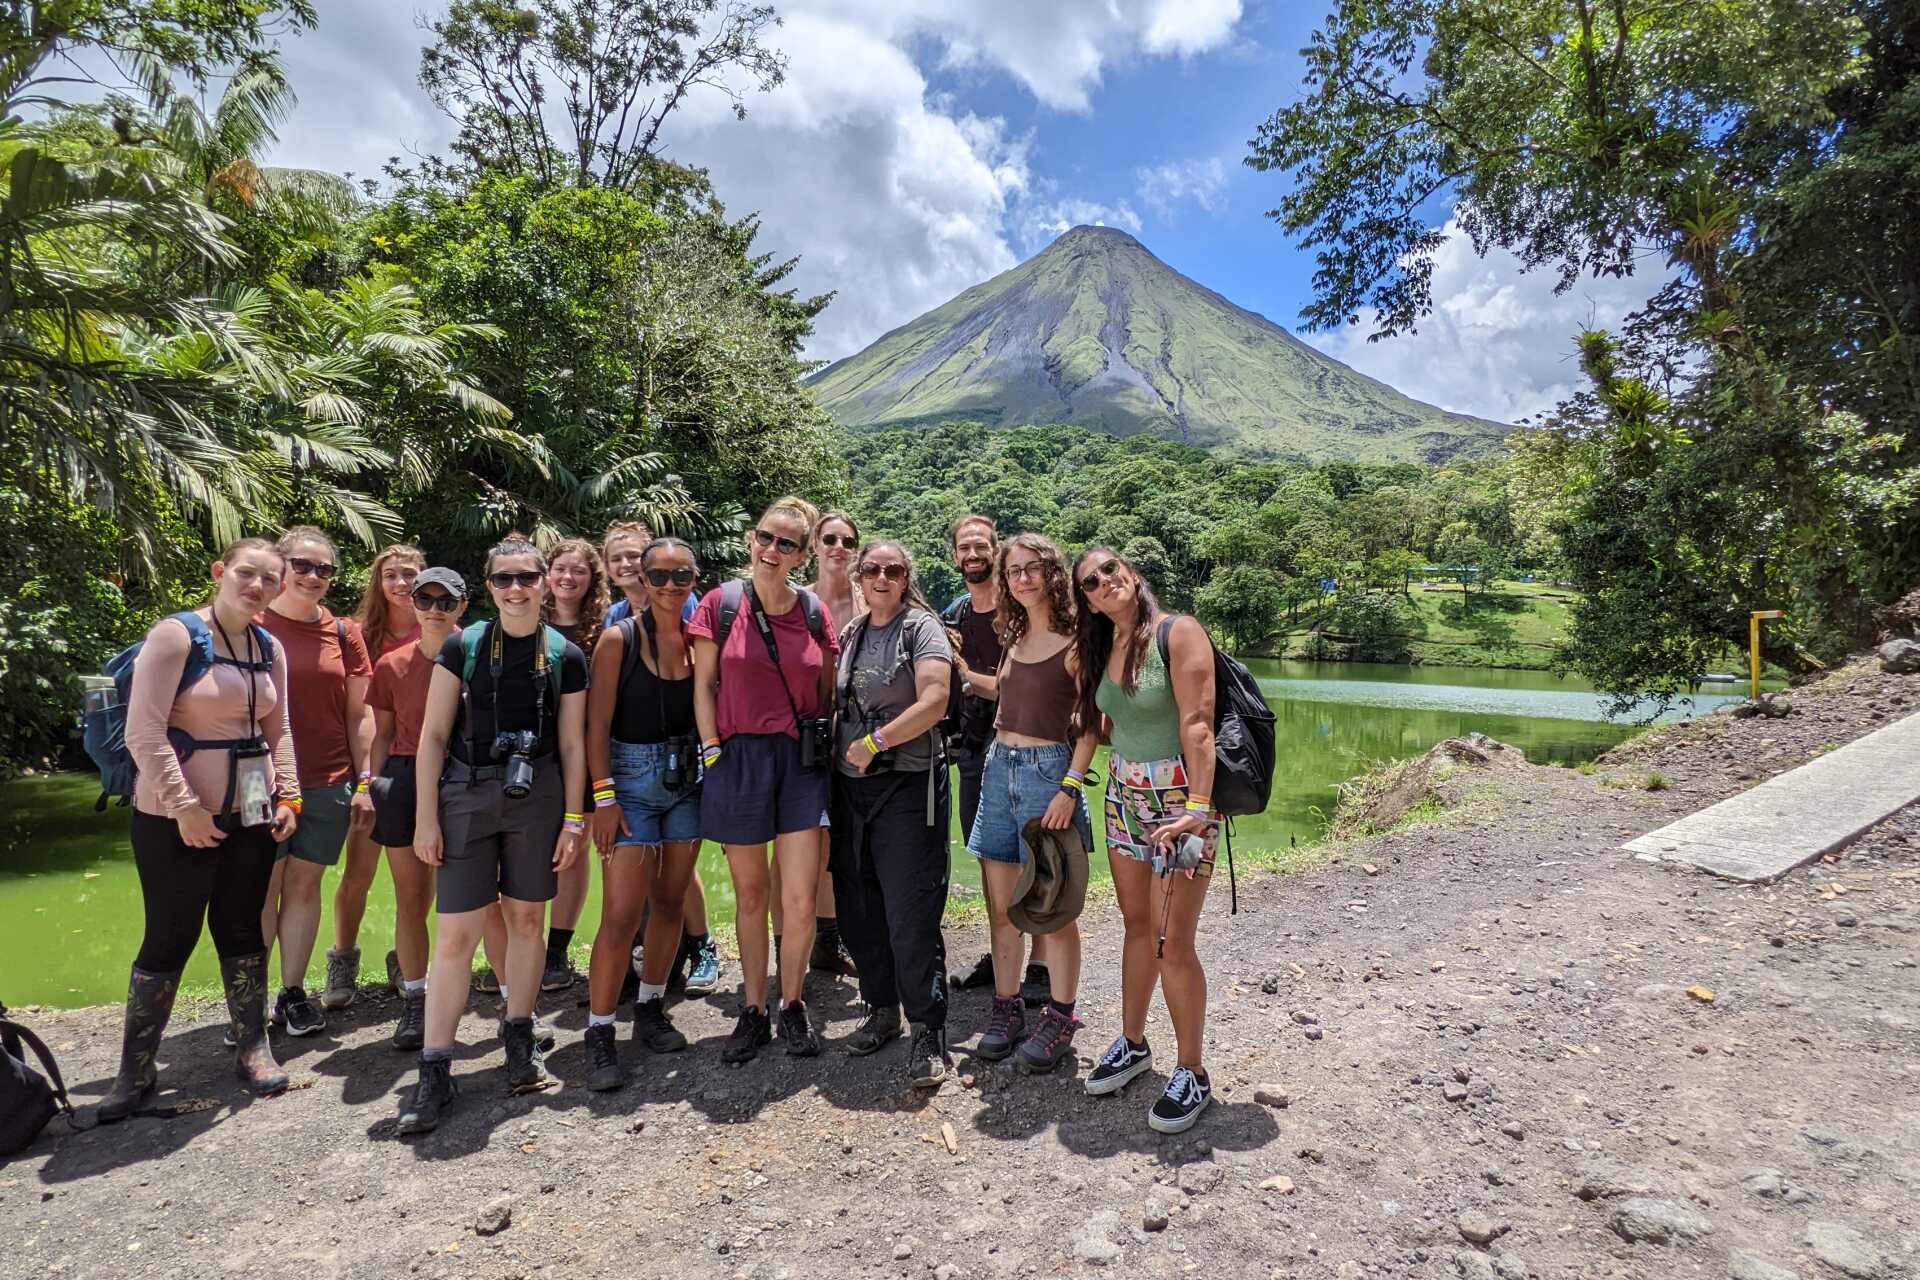 Group photo in front of a Costa Rican volcano